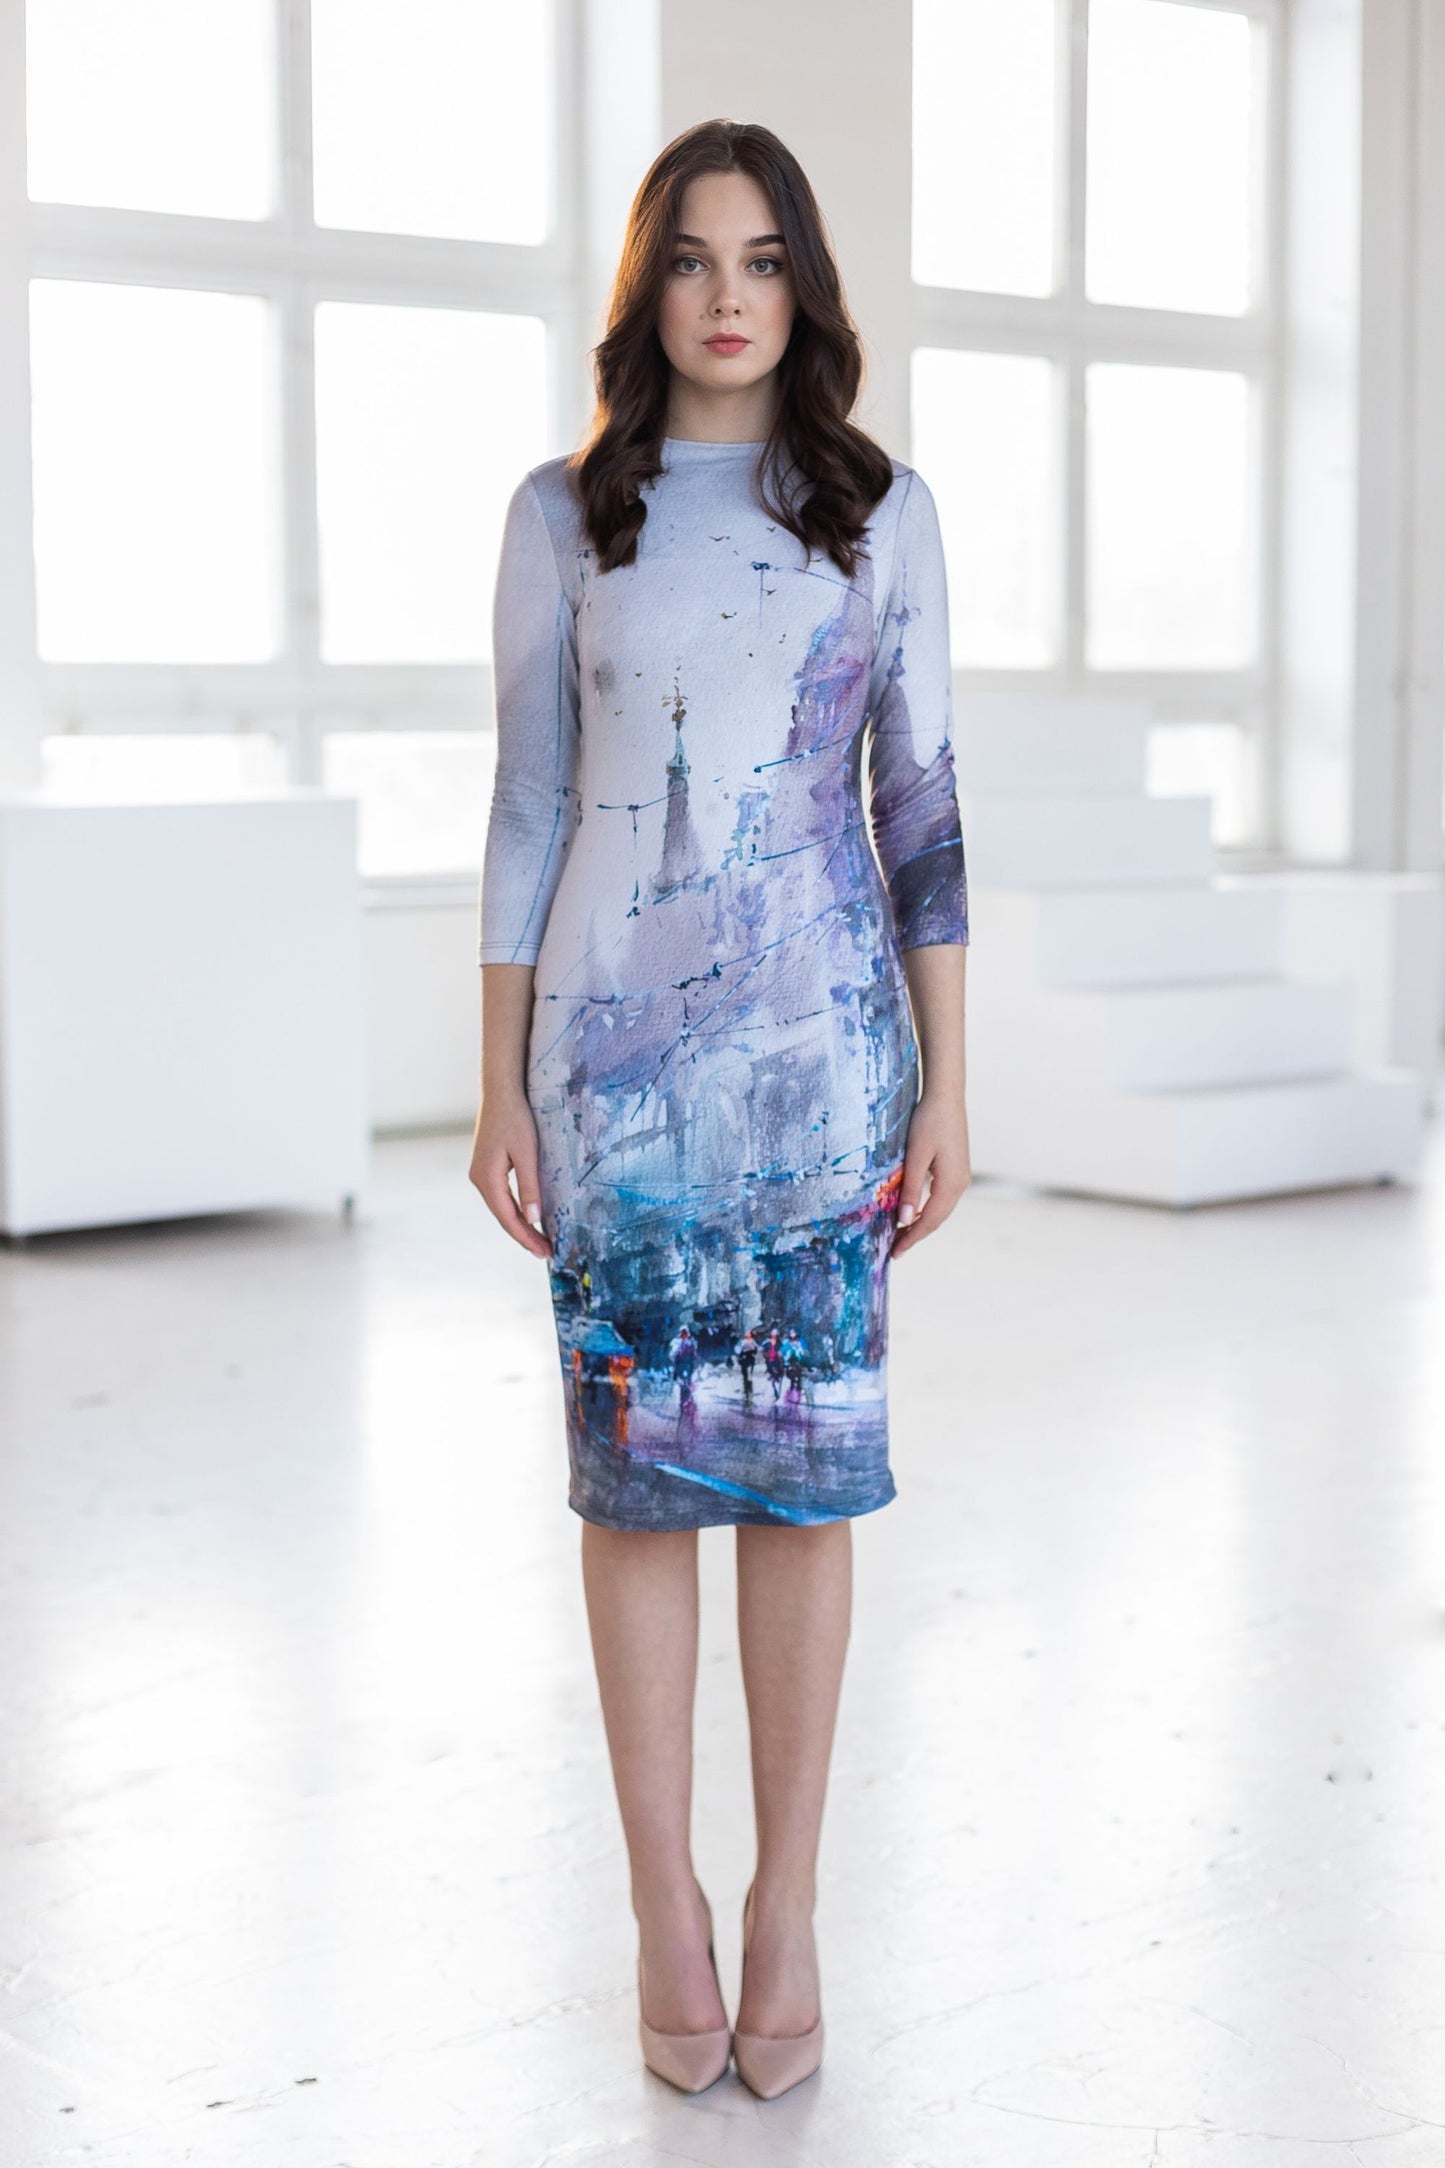 Half-length, tight-fitting dress with a painted view of Riga